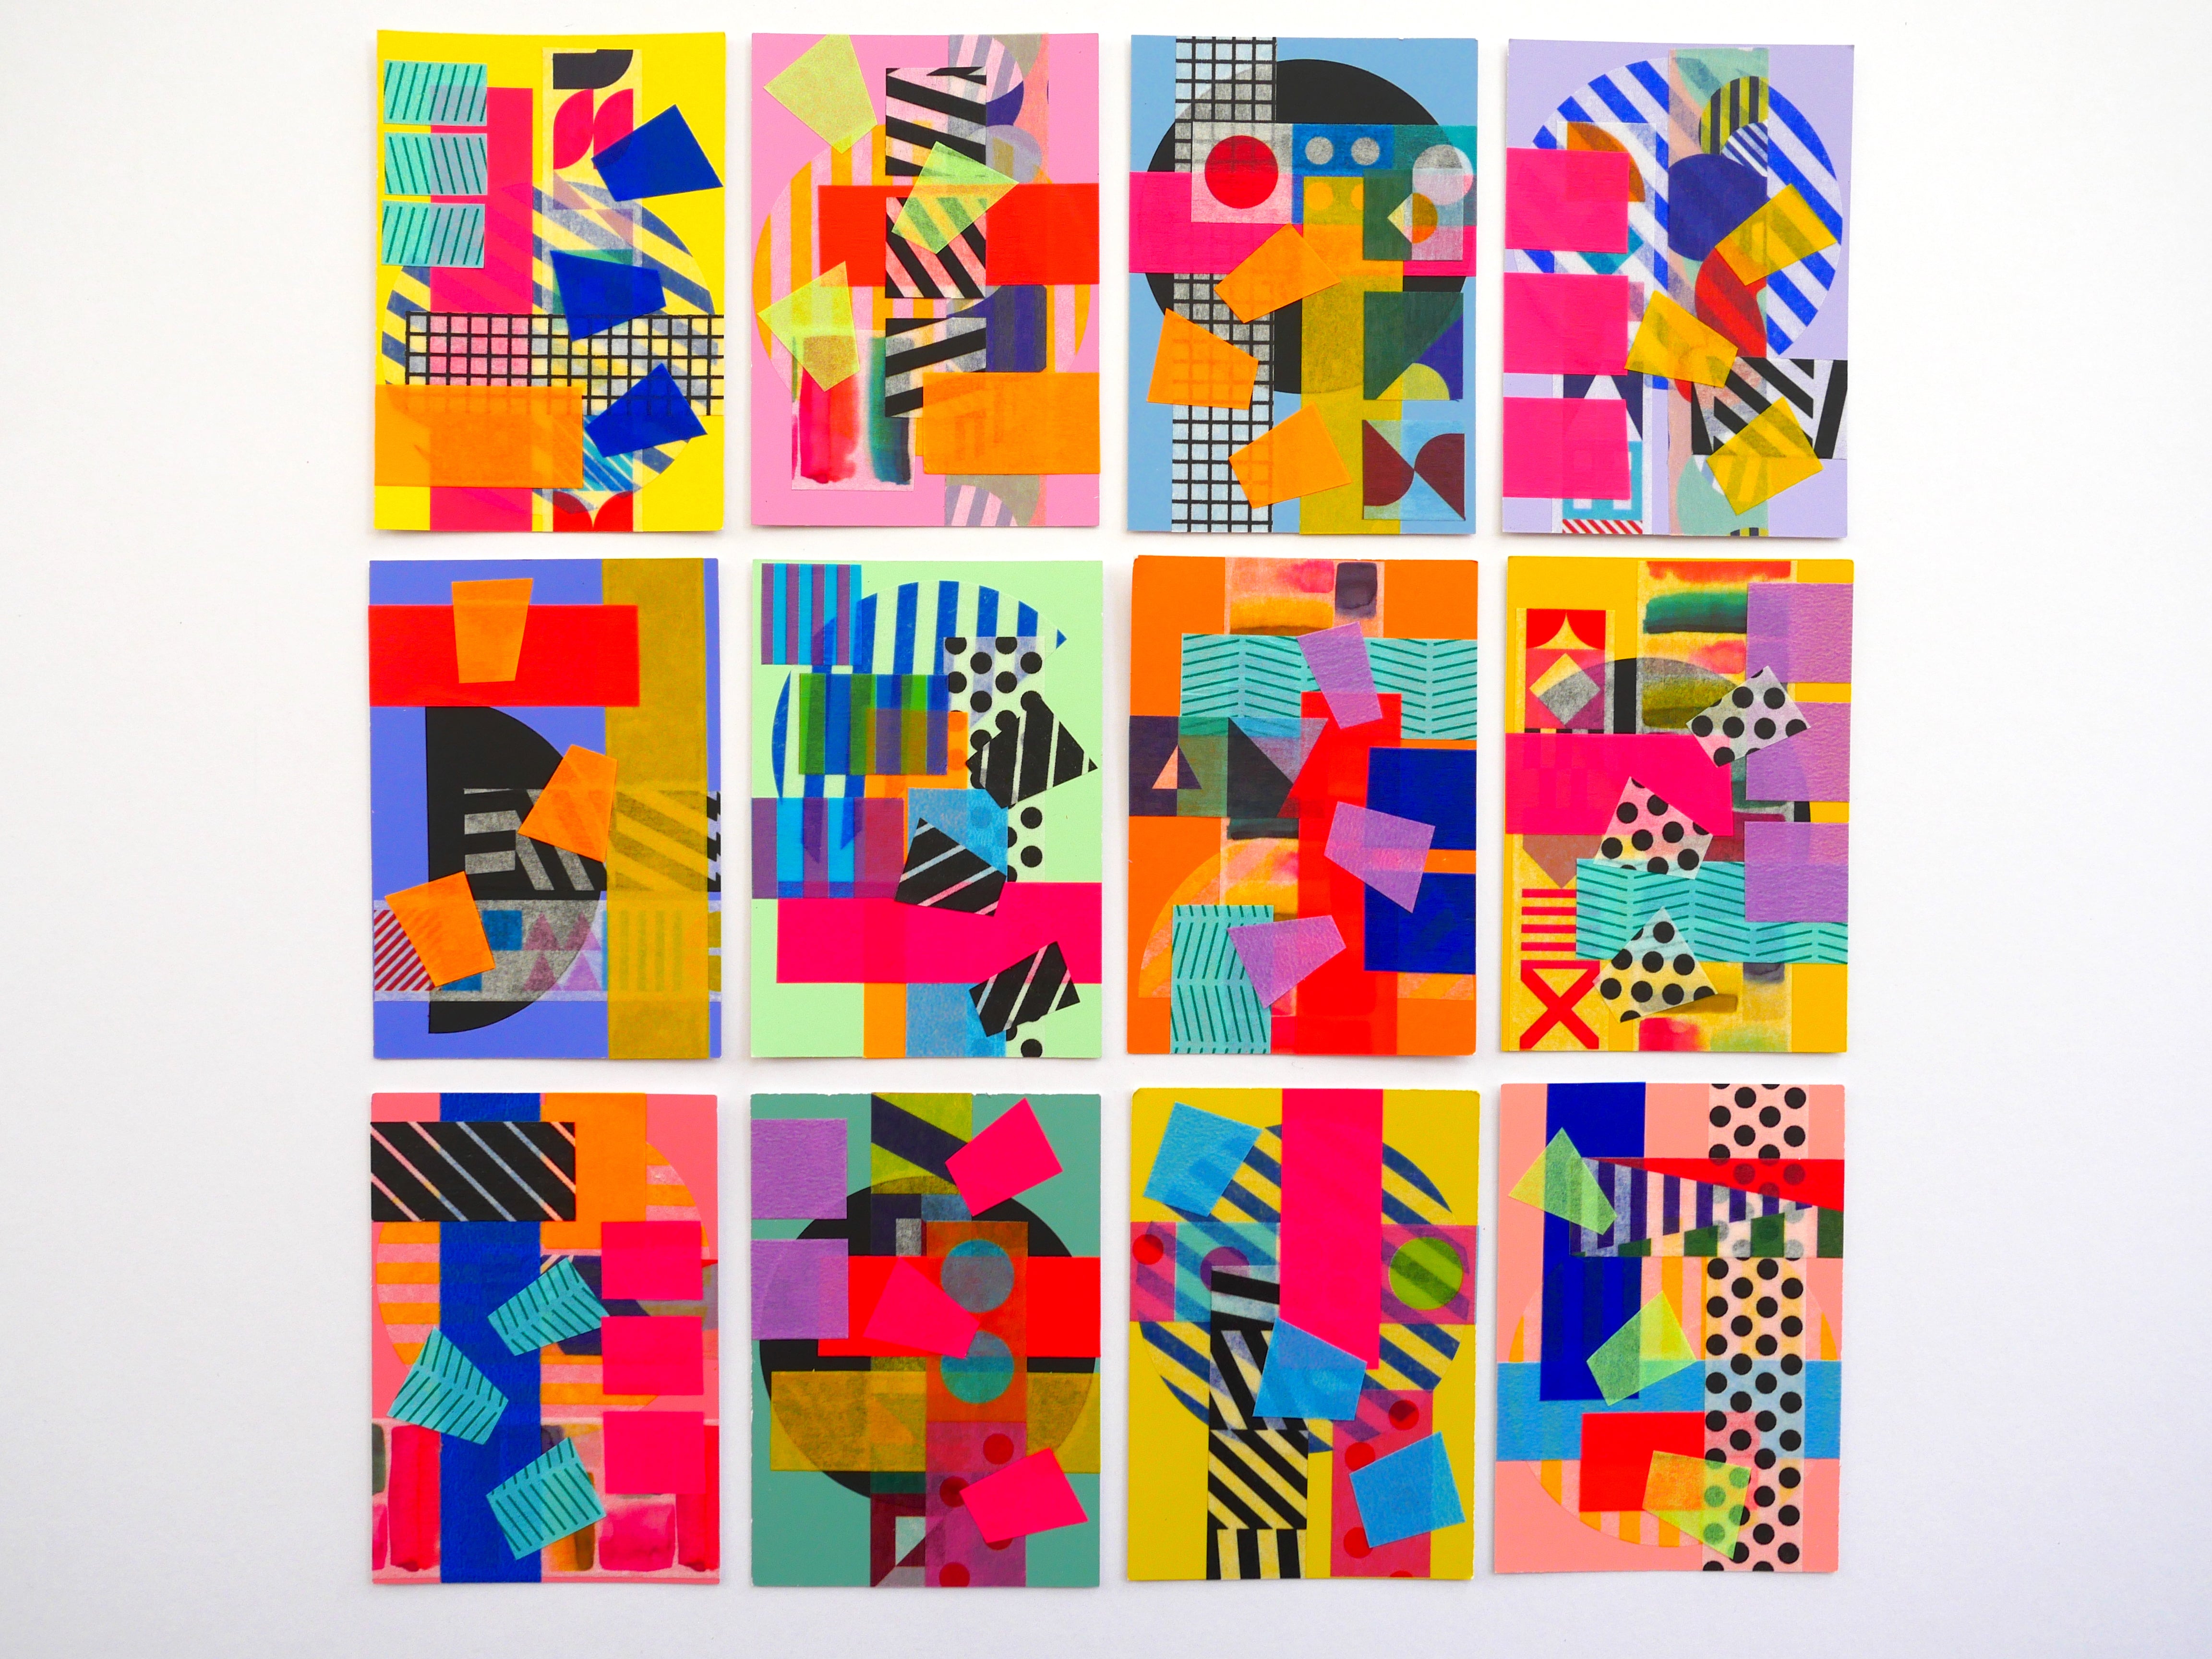 Collection of 12 mini collages in bright and neon colours created using washi tape in geometric and abstract designs.